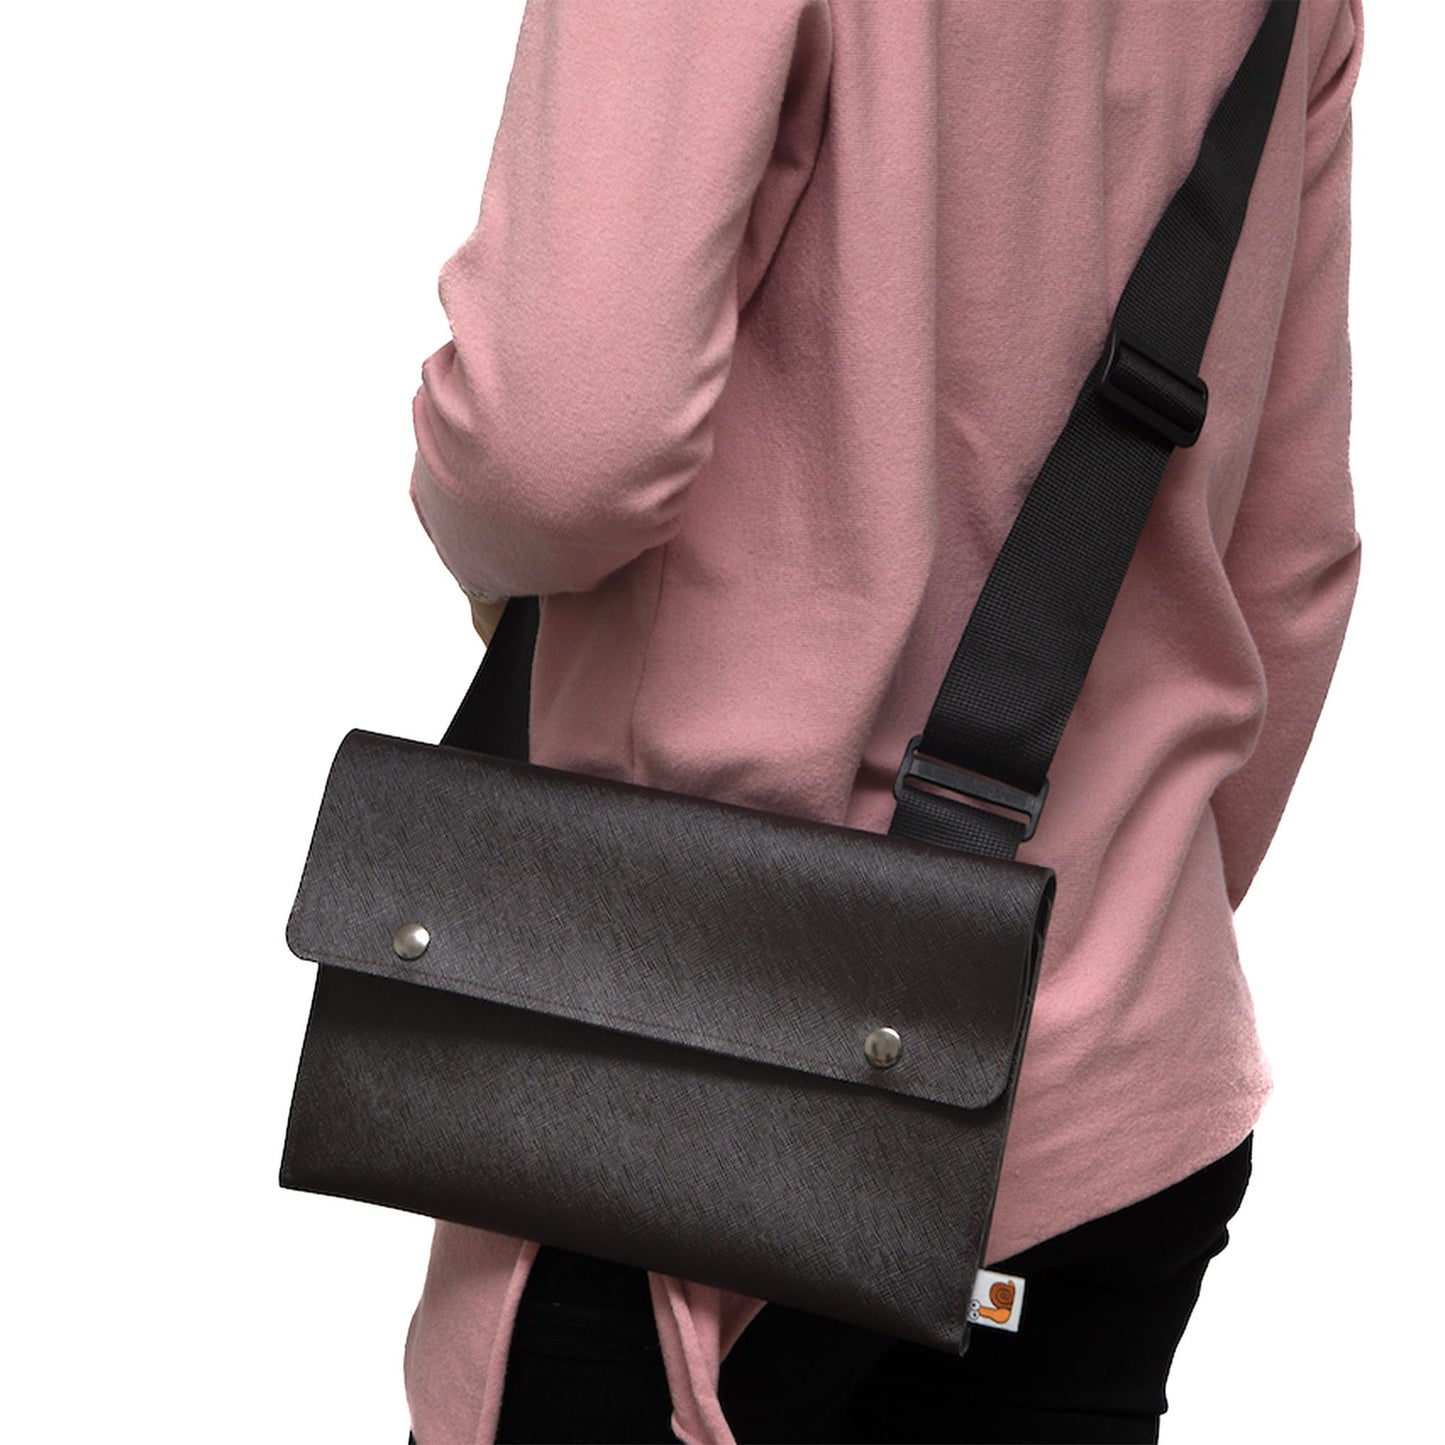 iPad Messenger Bag with Shoulder Strap - Brown Faux Leather